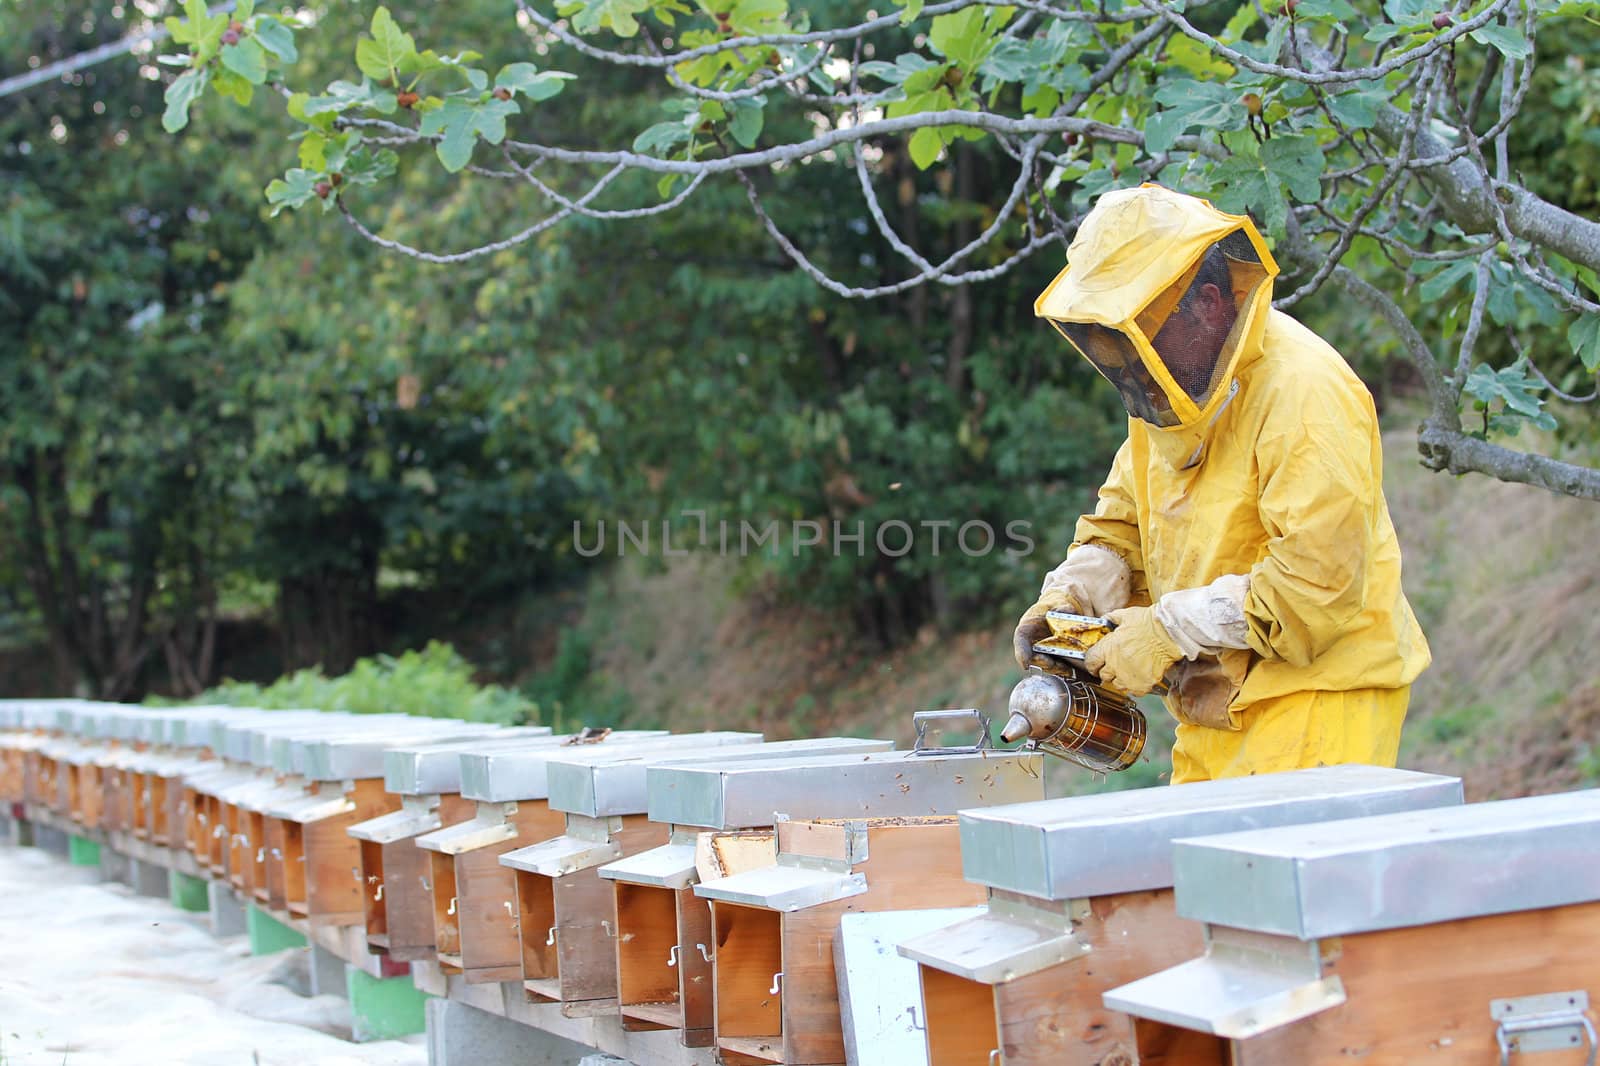 Beekeeper with smoker over a row of beehives